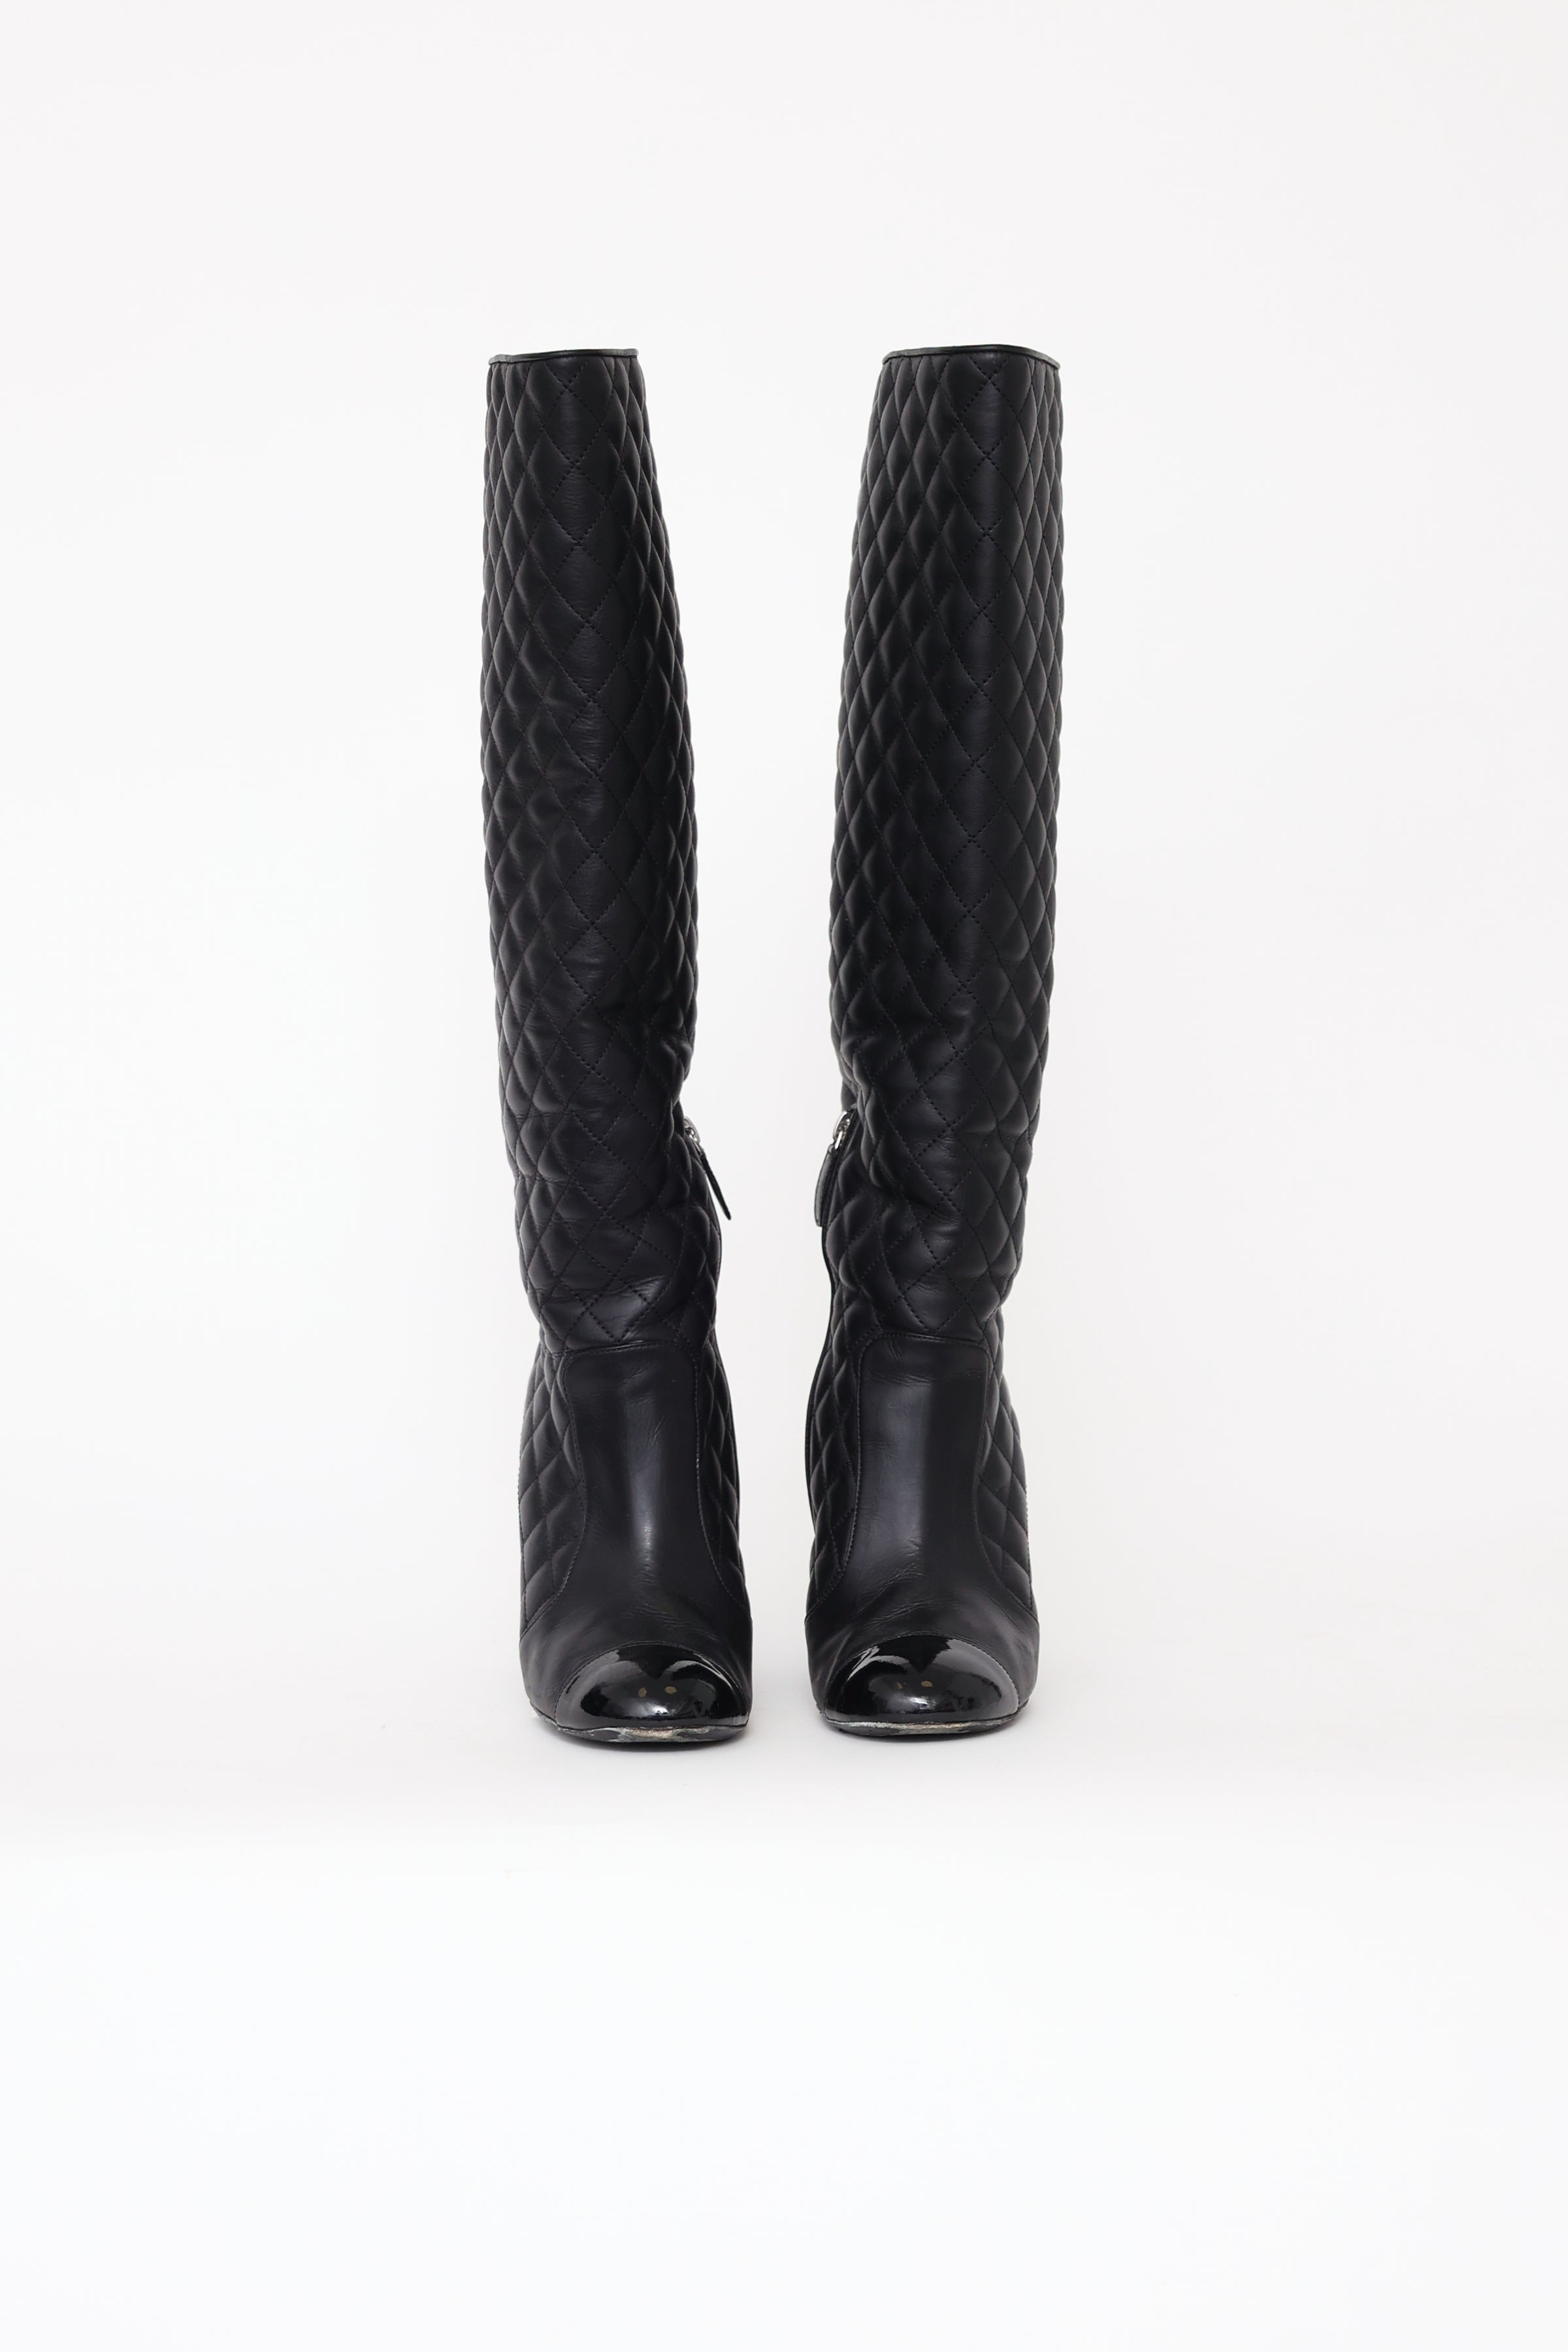 Chanel // Black Quilted Knee High Wedge Boot – VSP Consignment